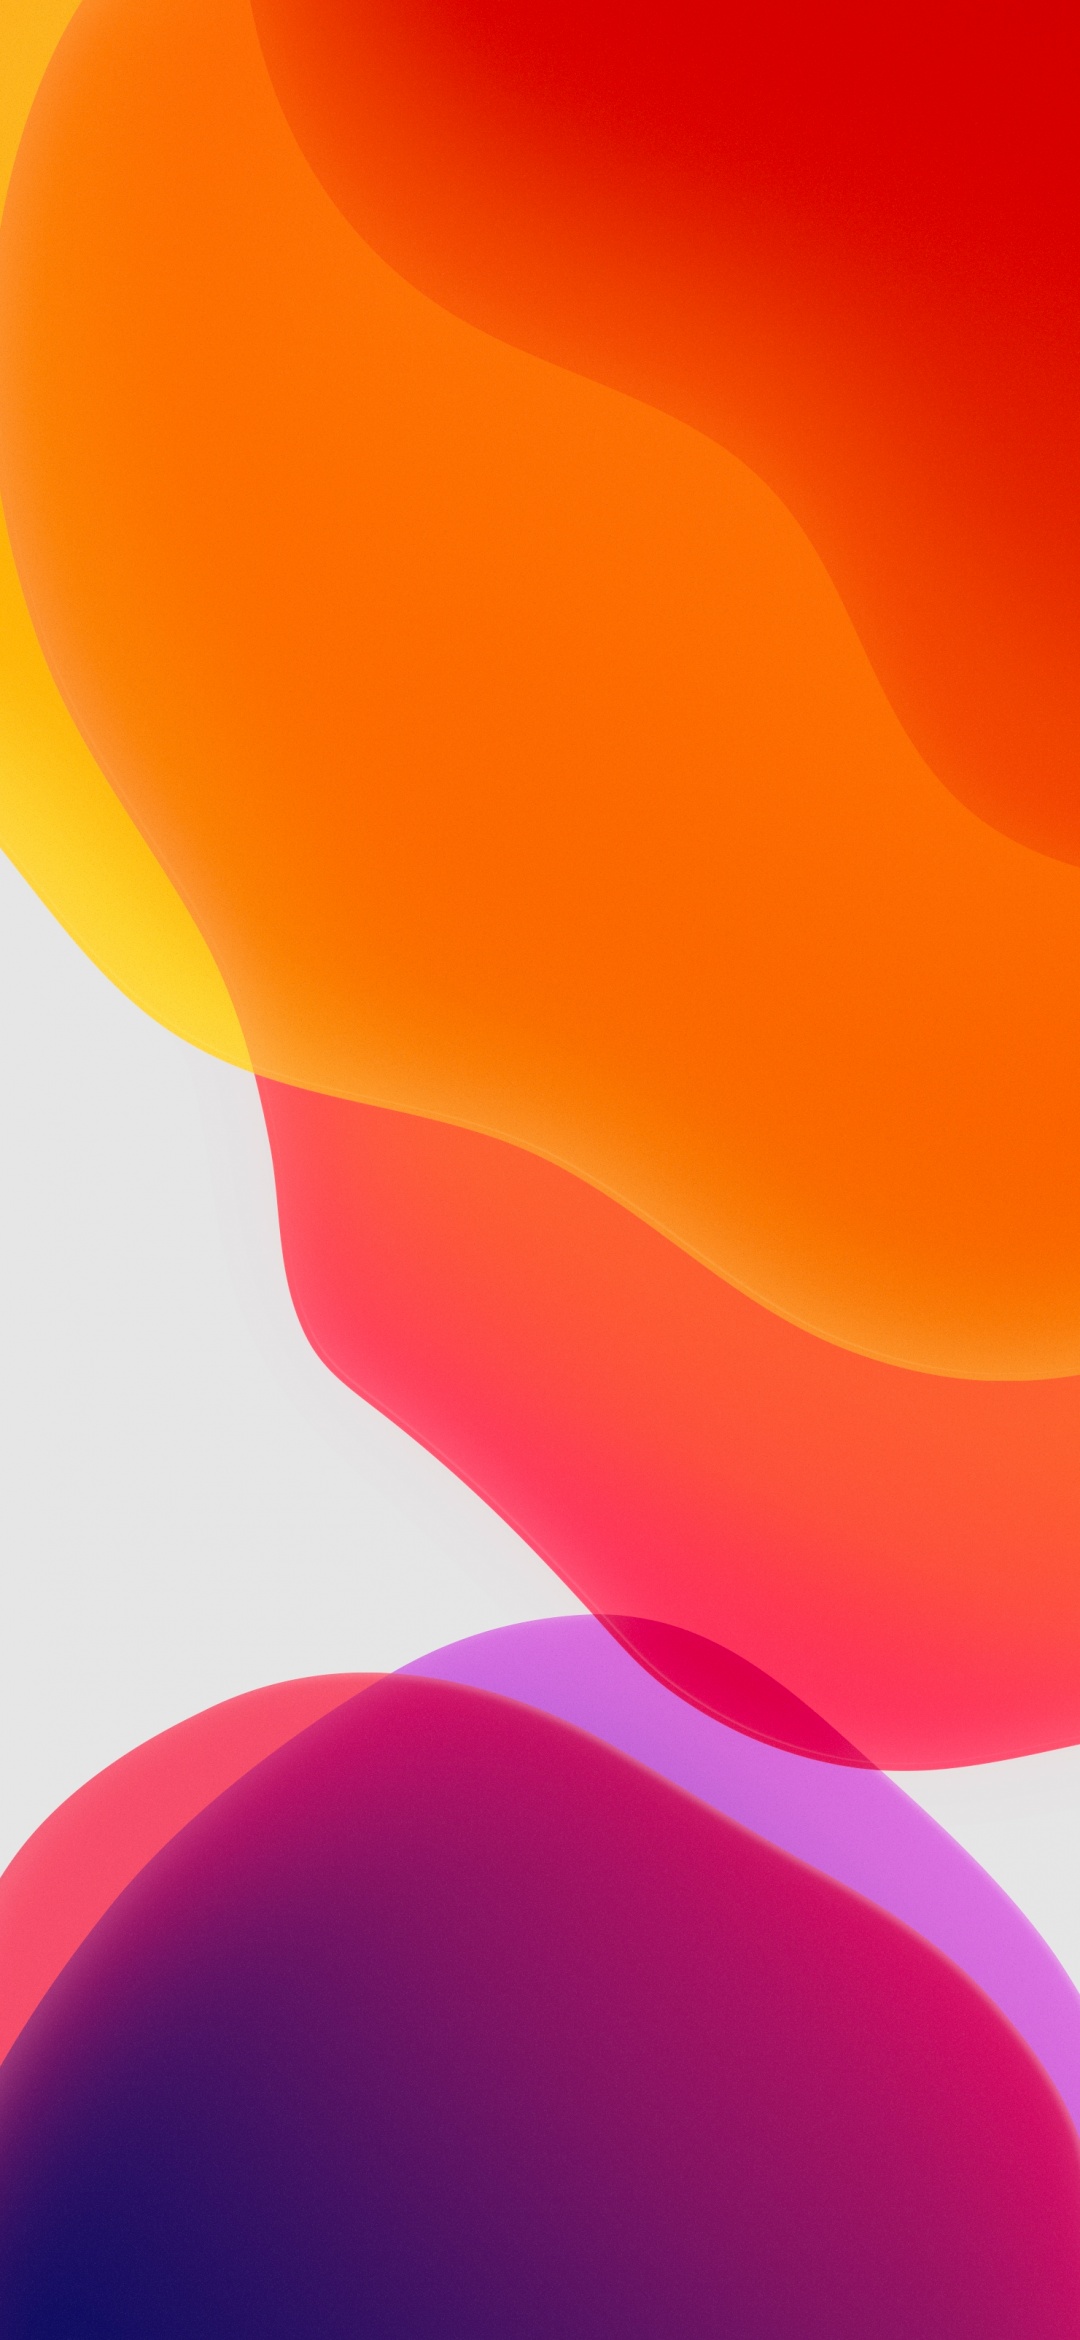 Download Redmi 9 Power Stock Wallpapers FHD